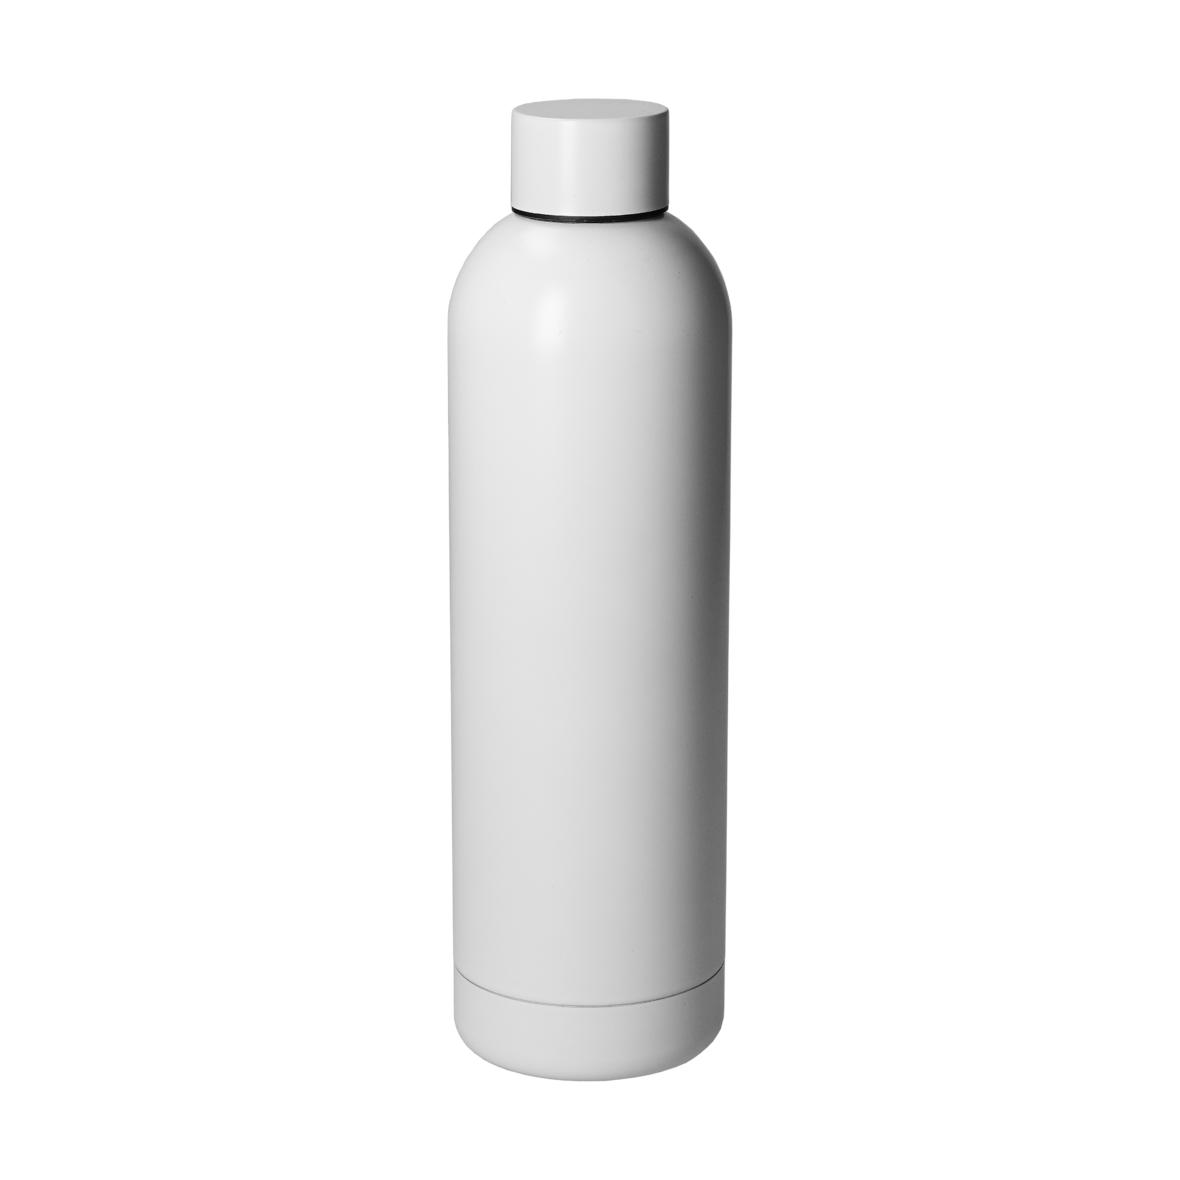 Double-Walled Insulated Stainless Steel Bottle - Hutton-in-the-Forest